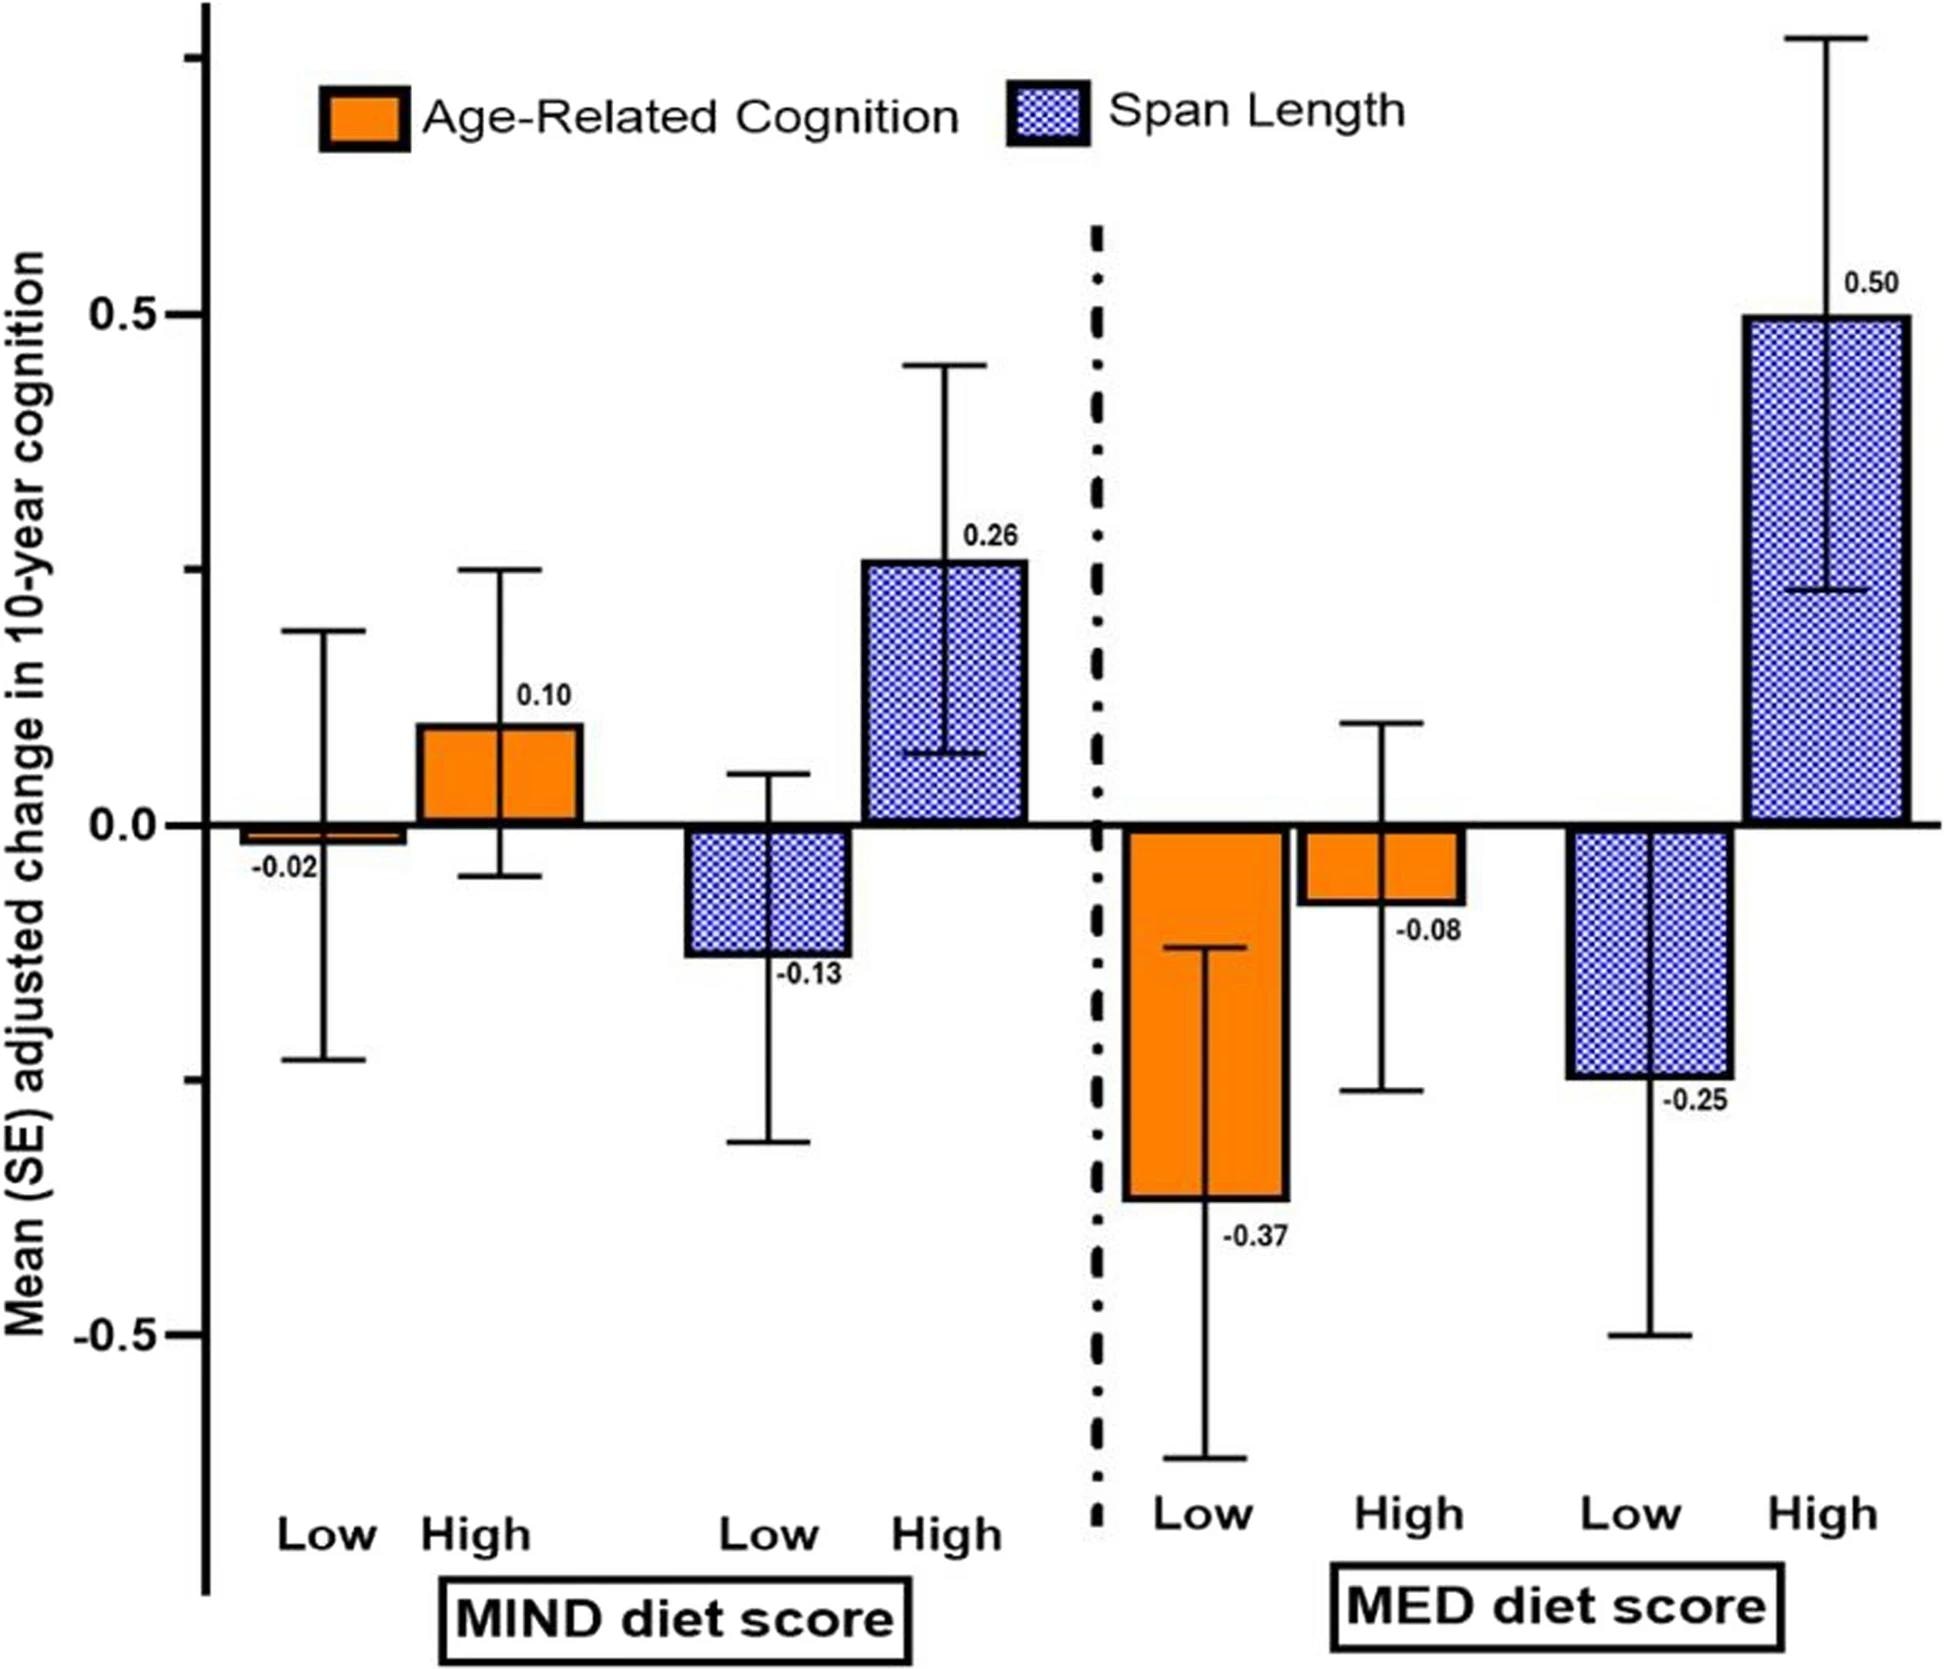 Change in adjusted mean (SE). Age-related cognition and spatial span length over 10 years in MZ twins discordant for MIND and MED diet score